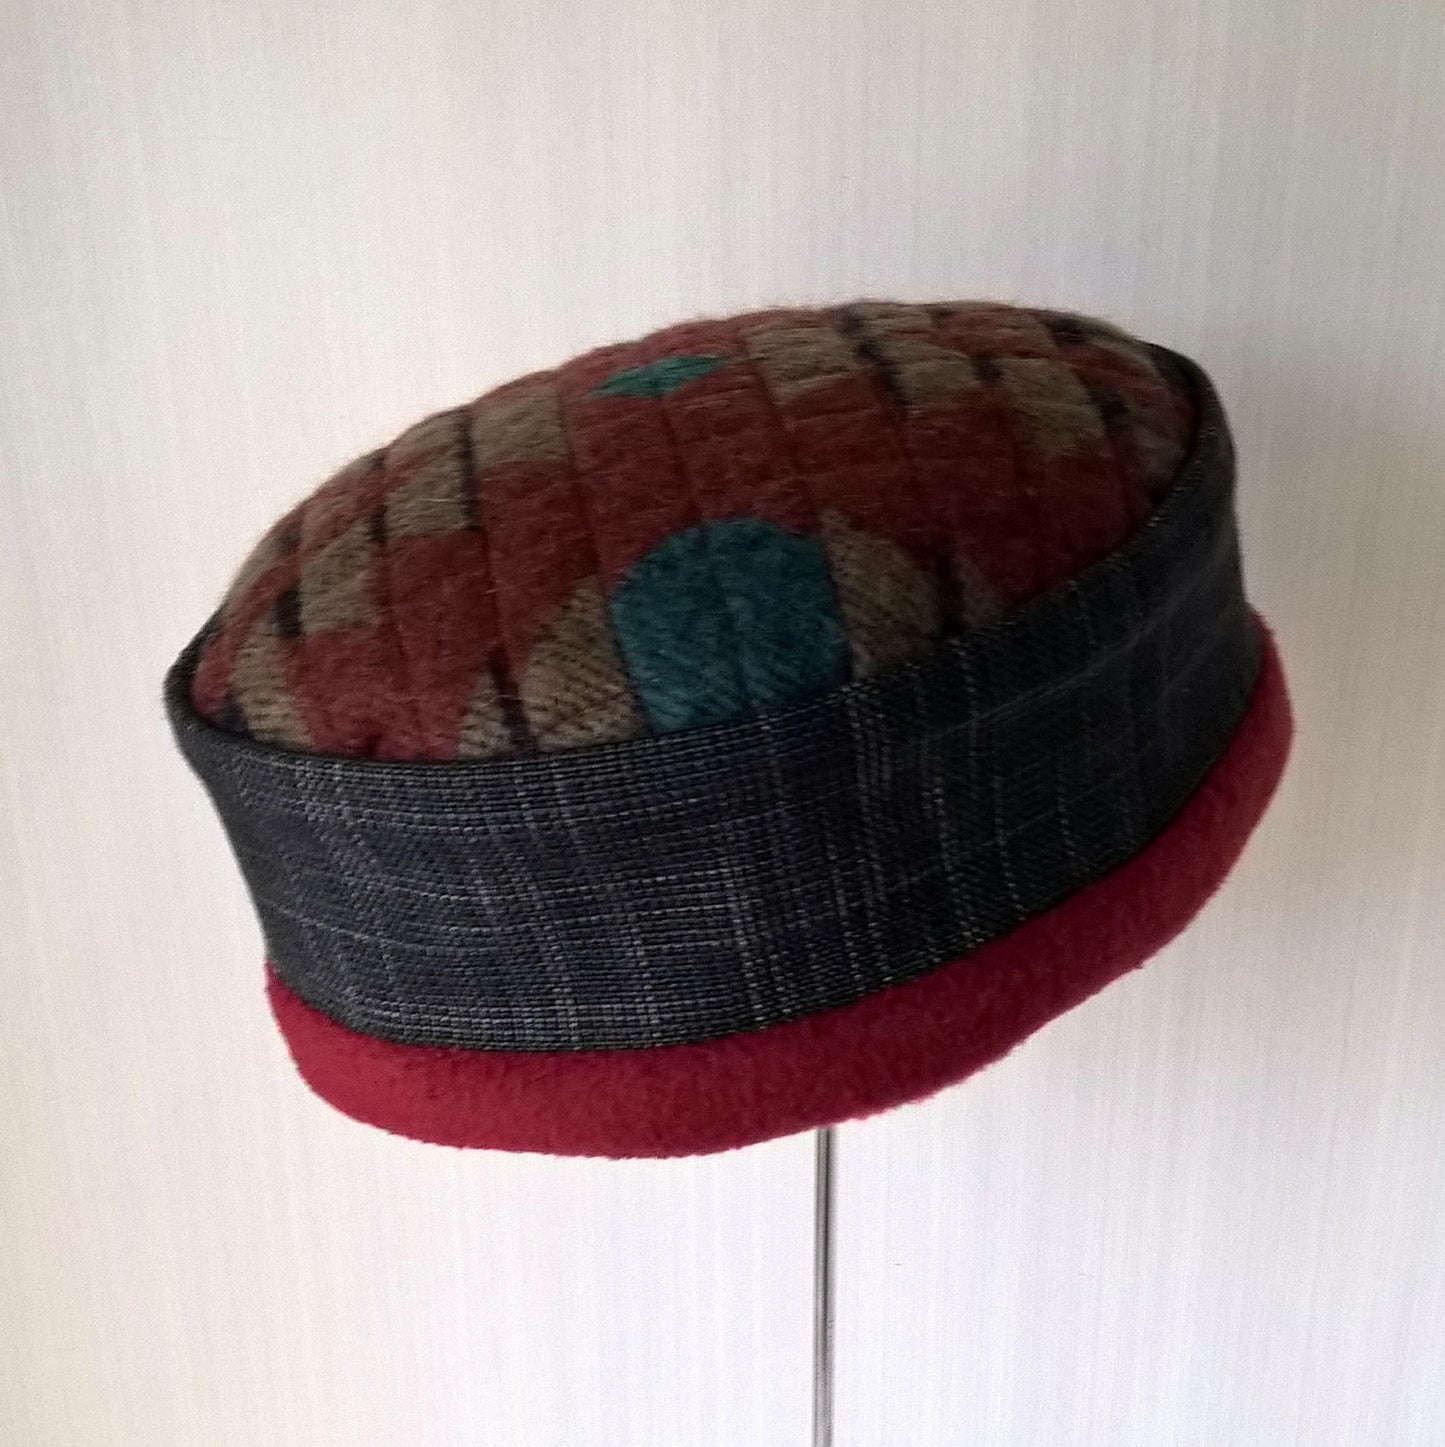 Pillbox shaped hat with Aztec patterned tip, grey hatch crown and raspberry red fleece edging